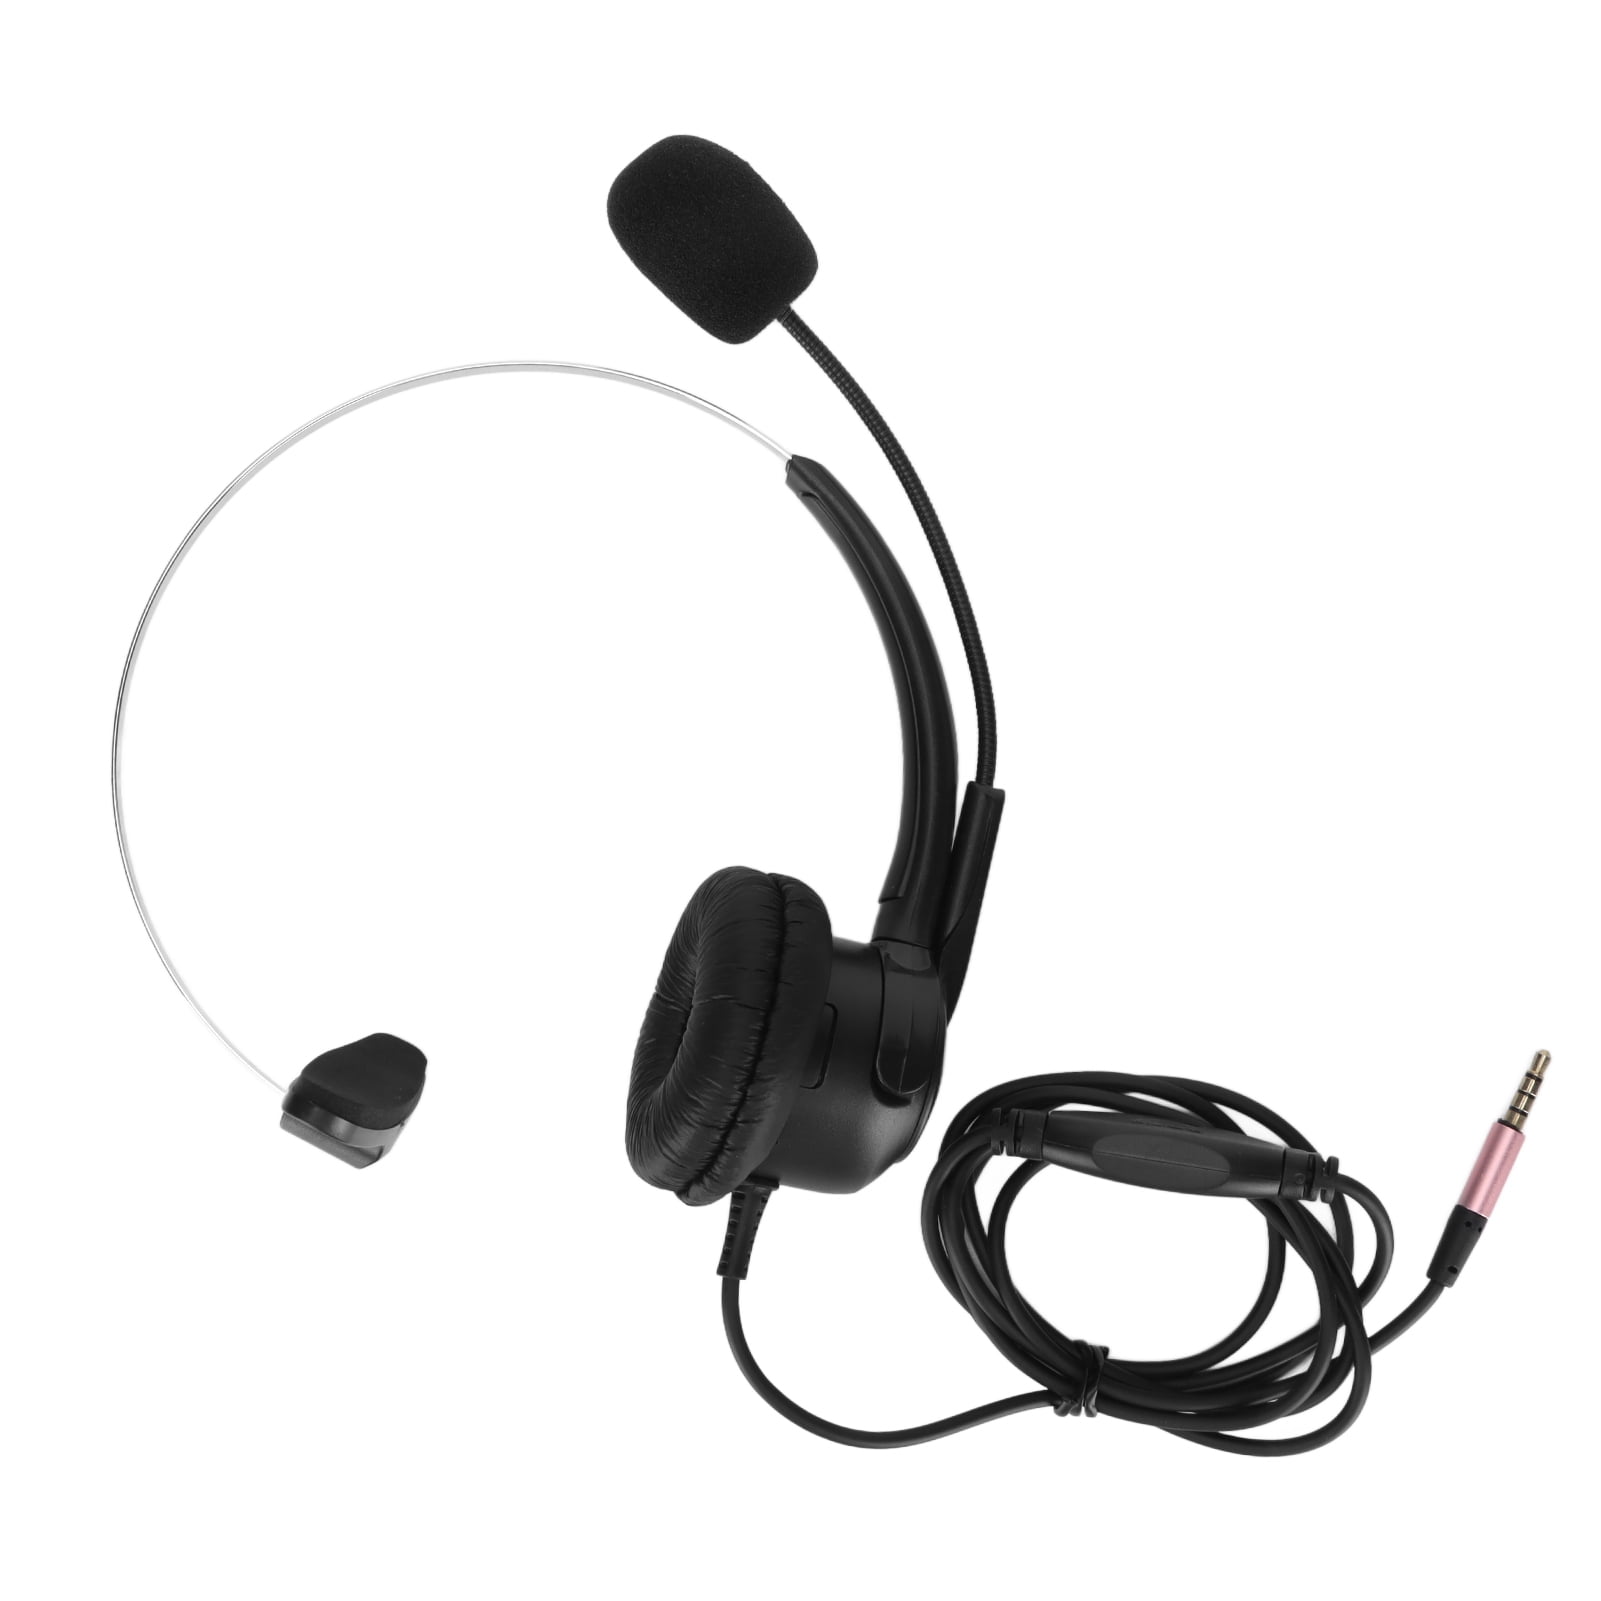 Spectra SP-PC Black Headband Headsets for sale online 